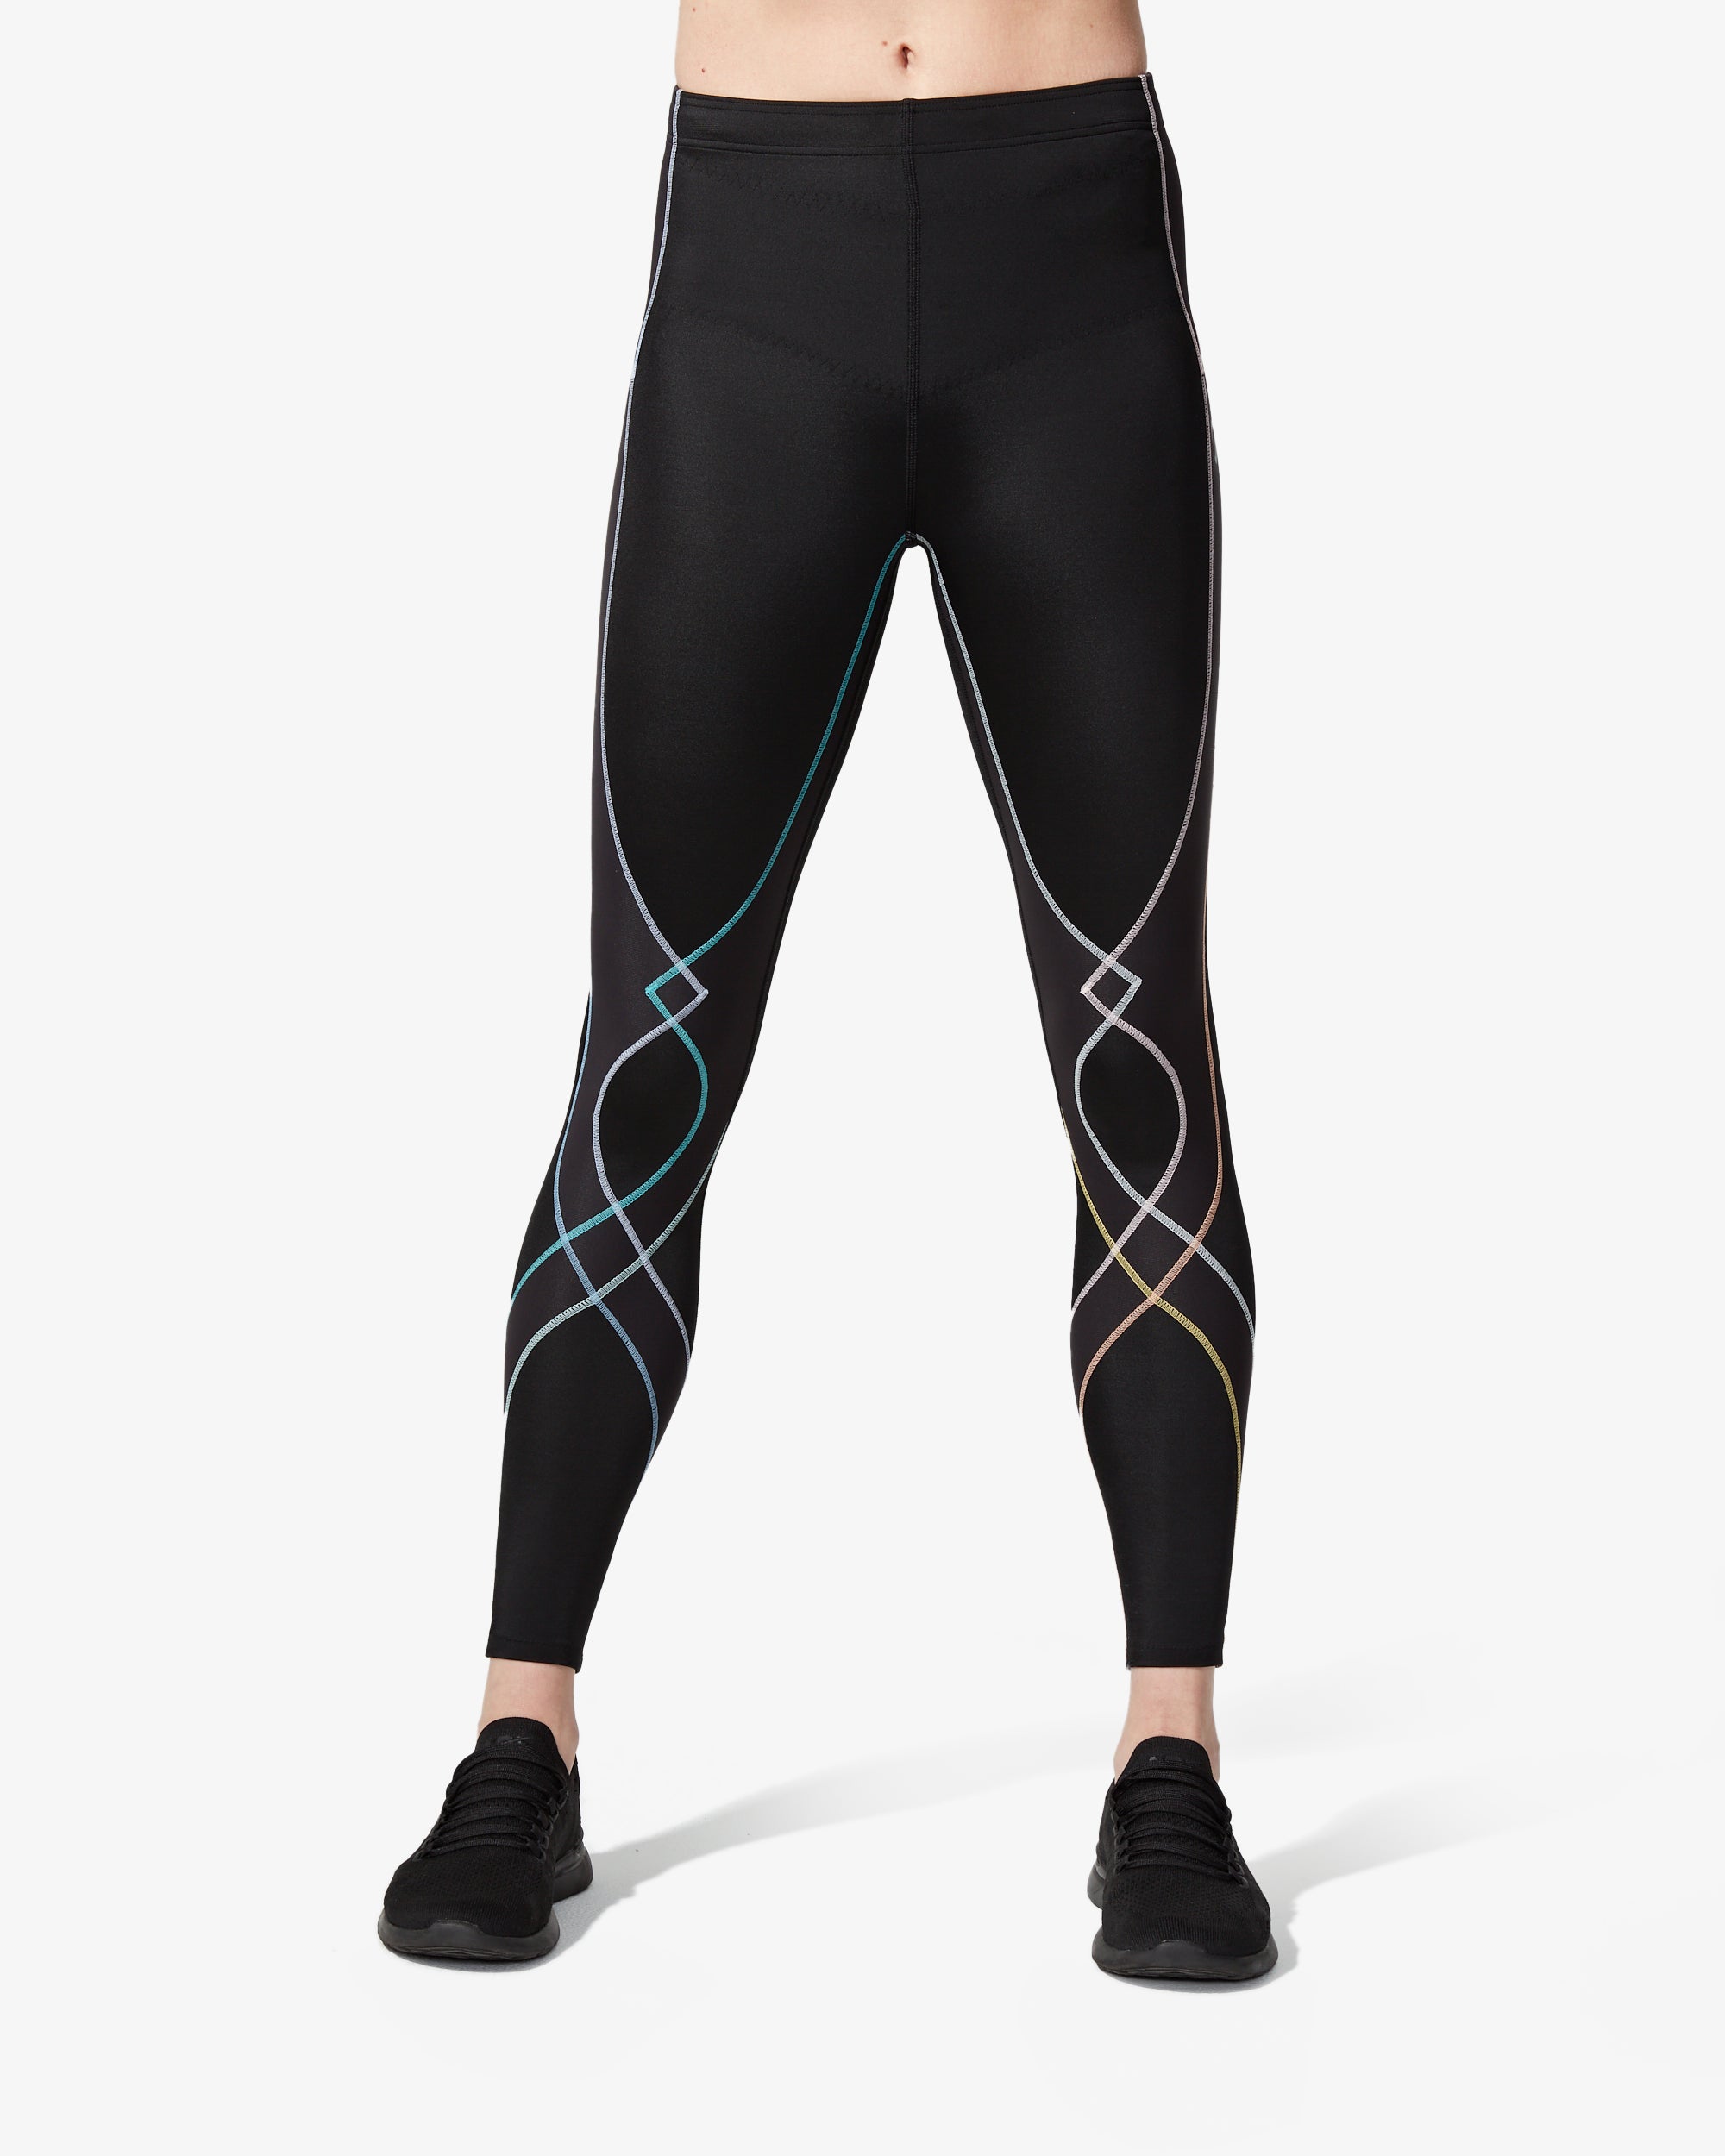 Stabilyx Joint Support Compression Tight - Women's Black/Gradient